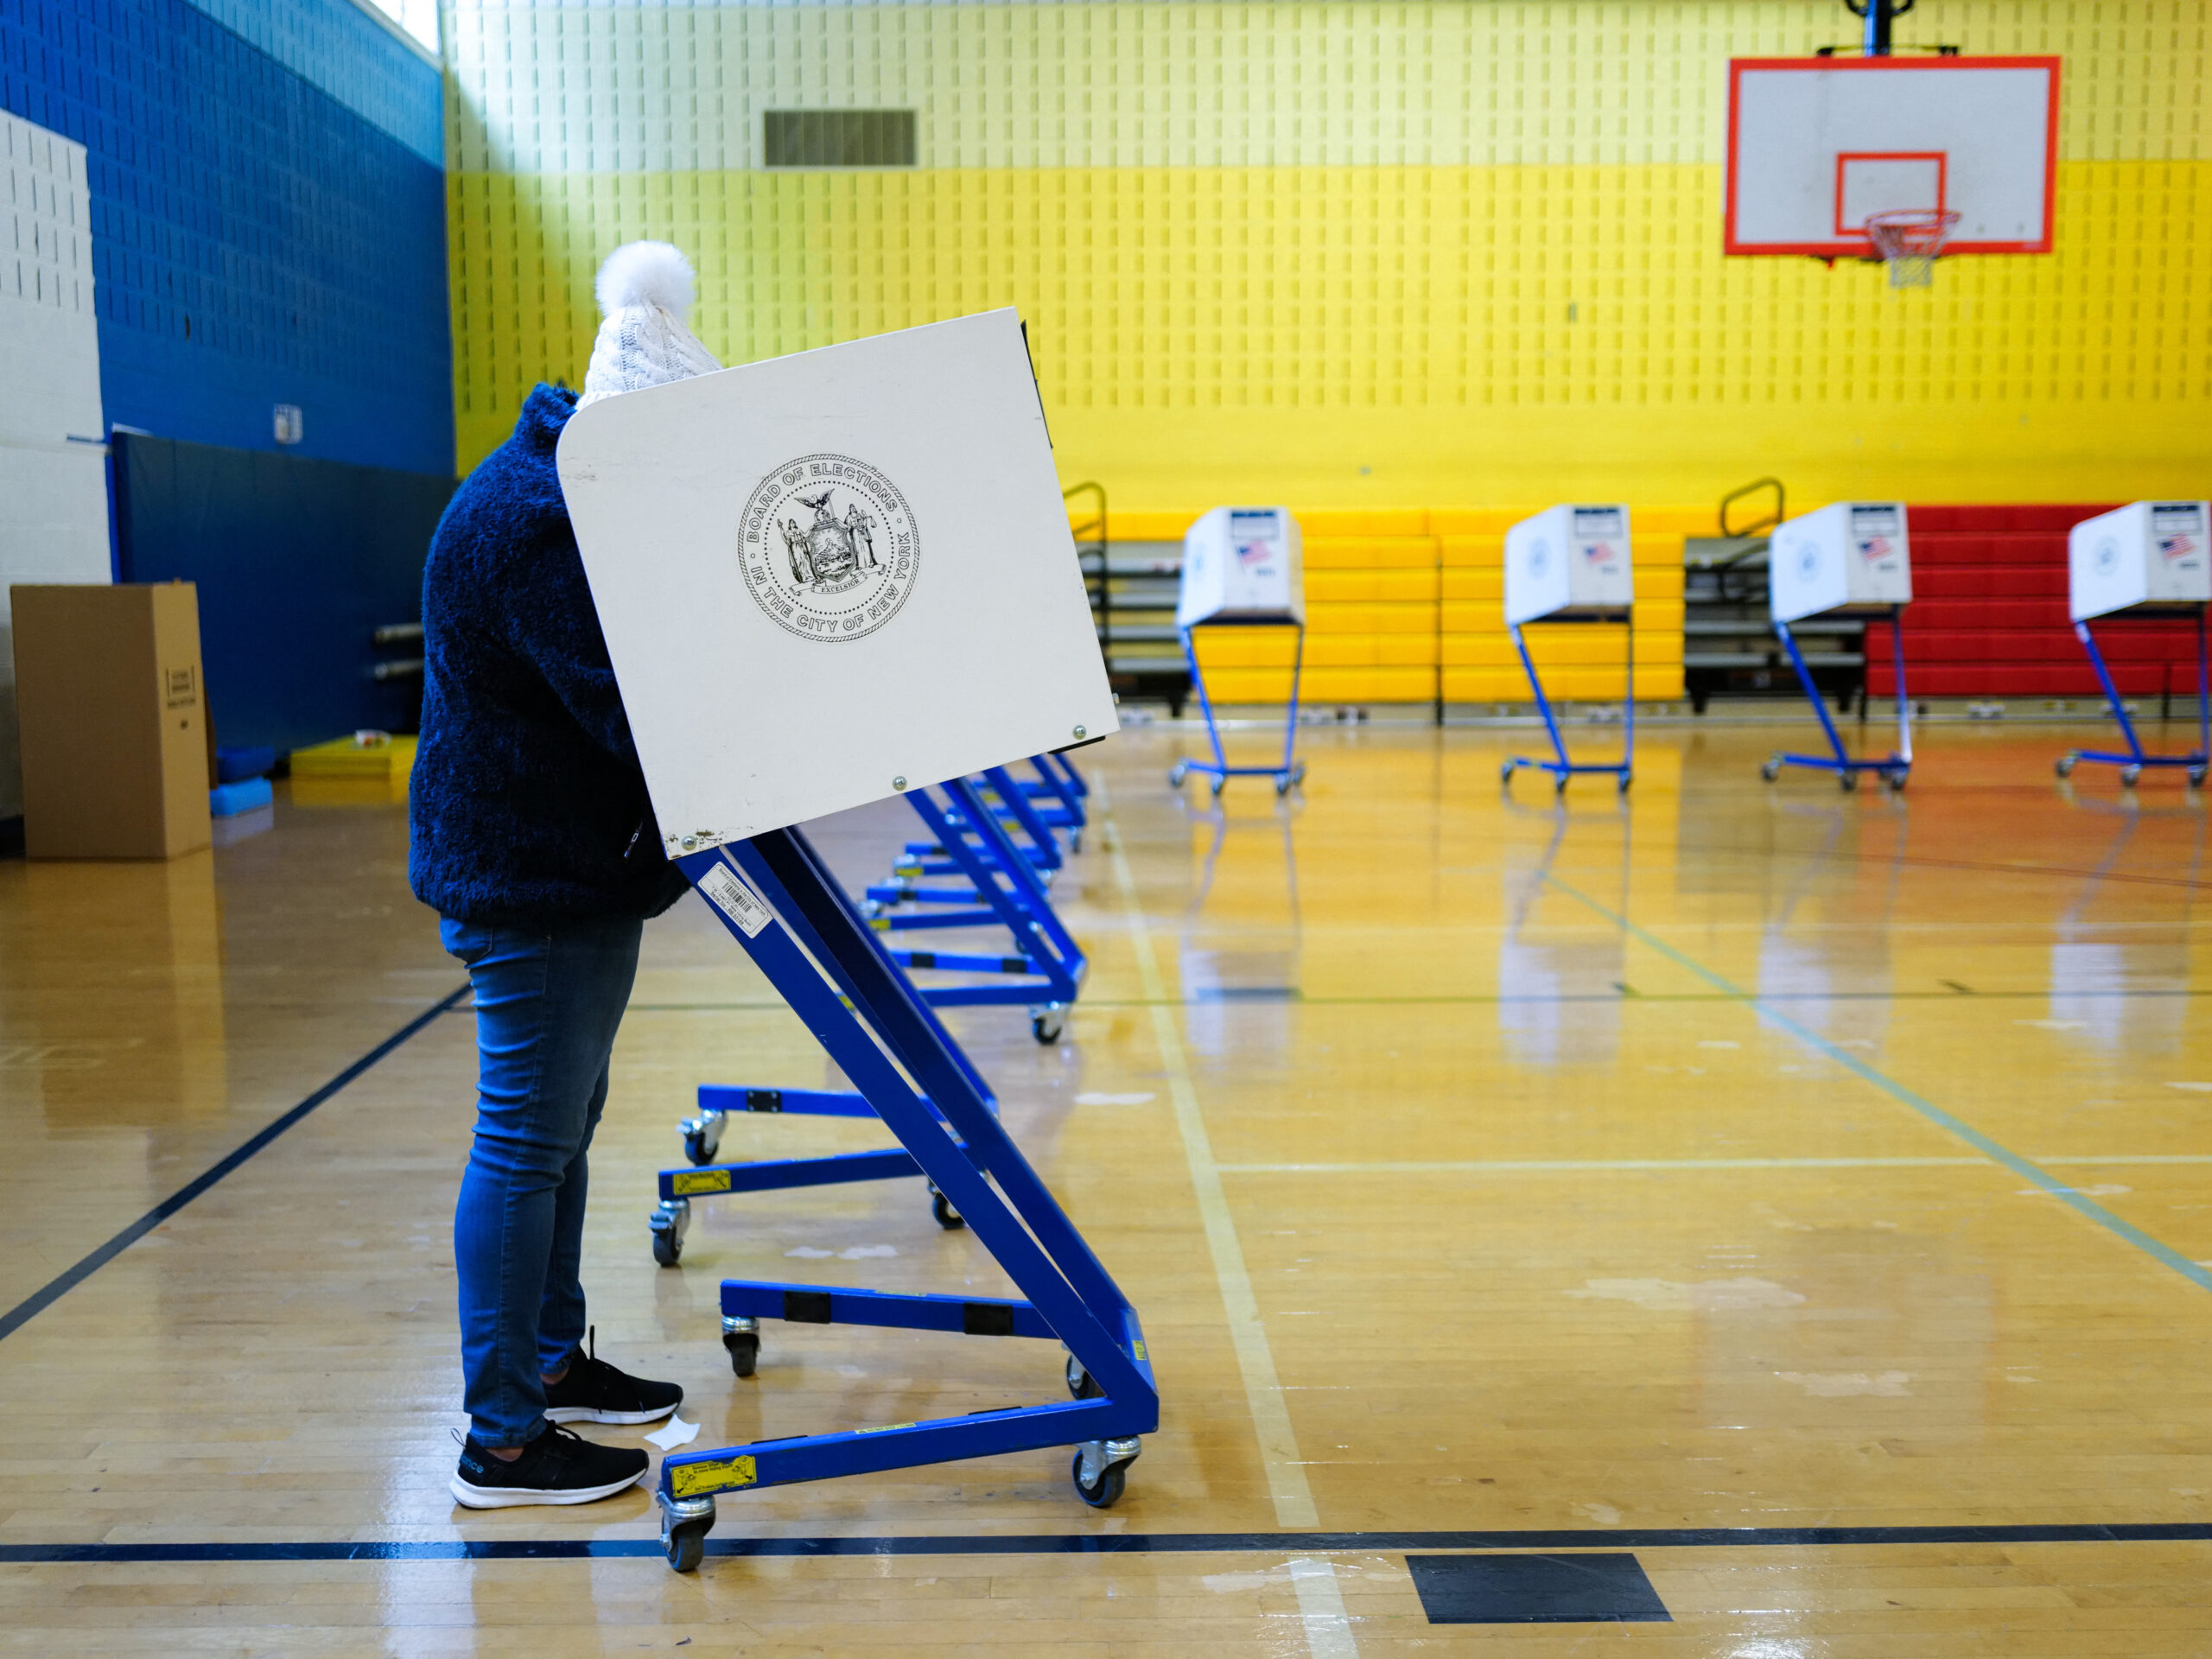 New federal grants aimed to support elections. Many voting officials didn’t see a dime